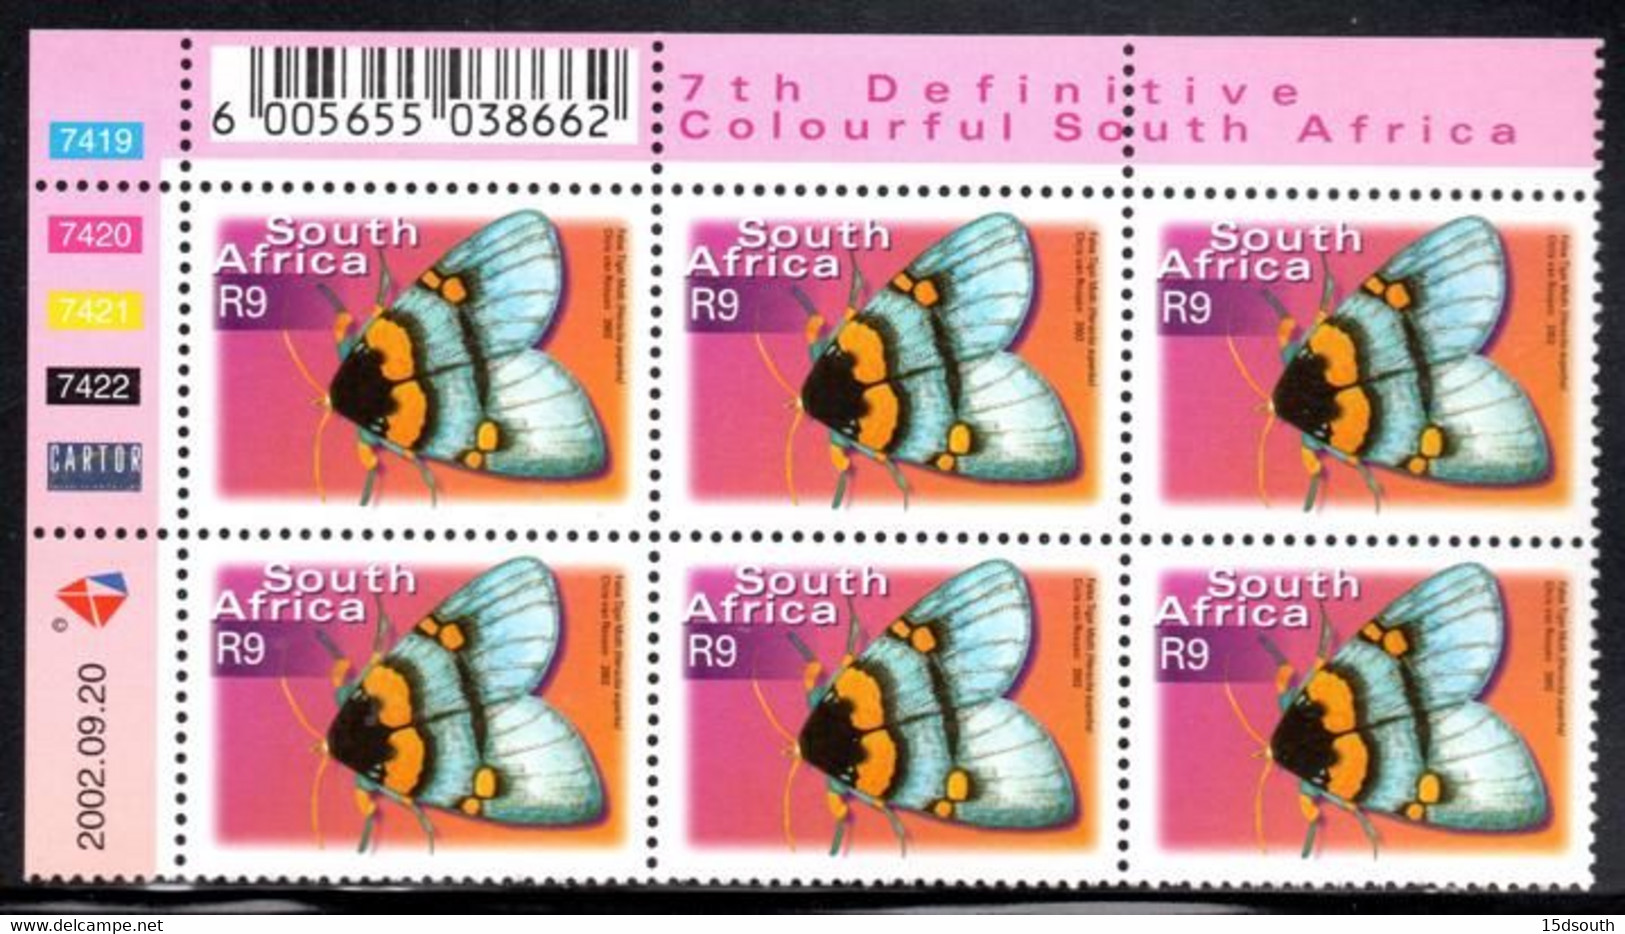 South Africa - 2002 7th Definitive Fauna And Flora R9 Moth Control Block (**) (2002.09.20) - Blocks & Sheetlets